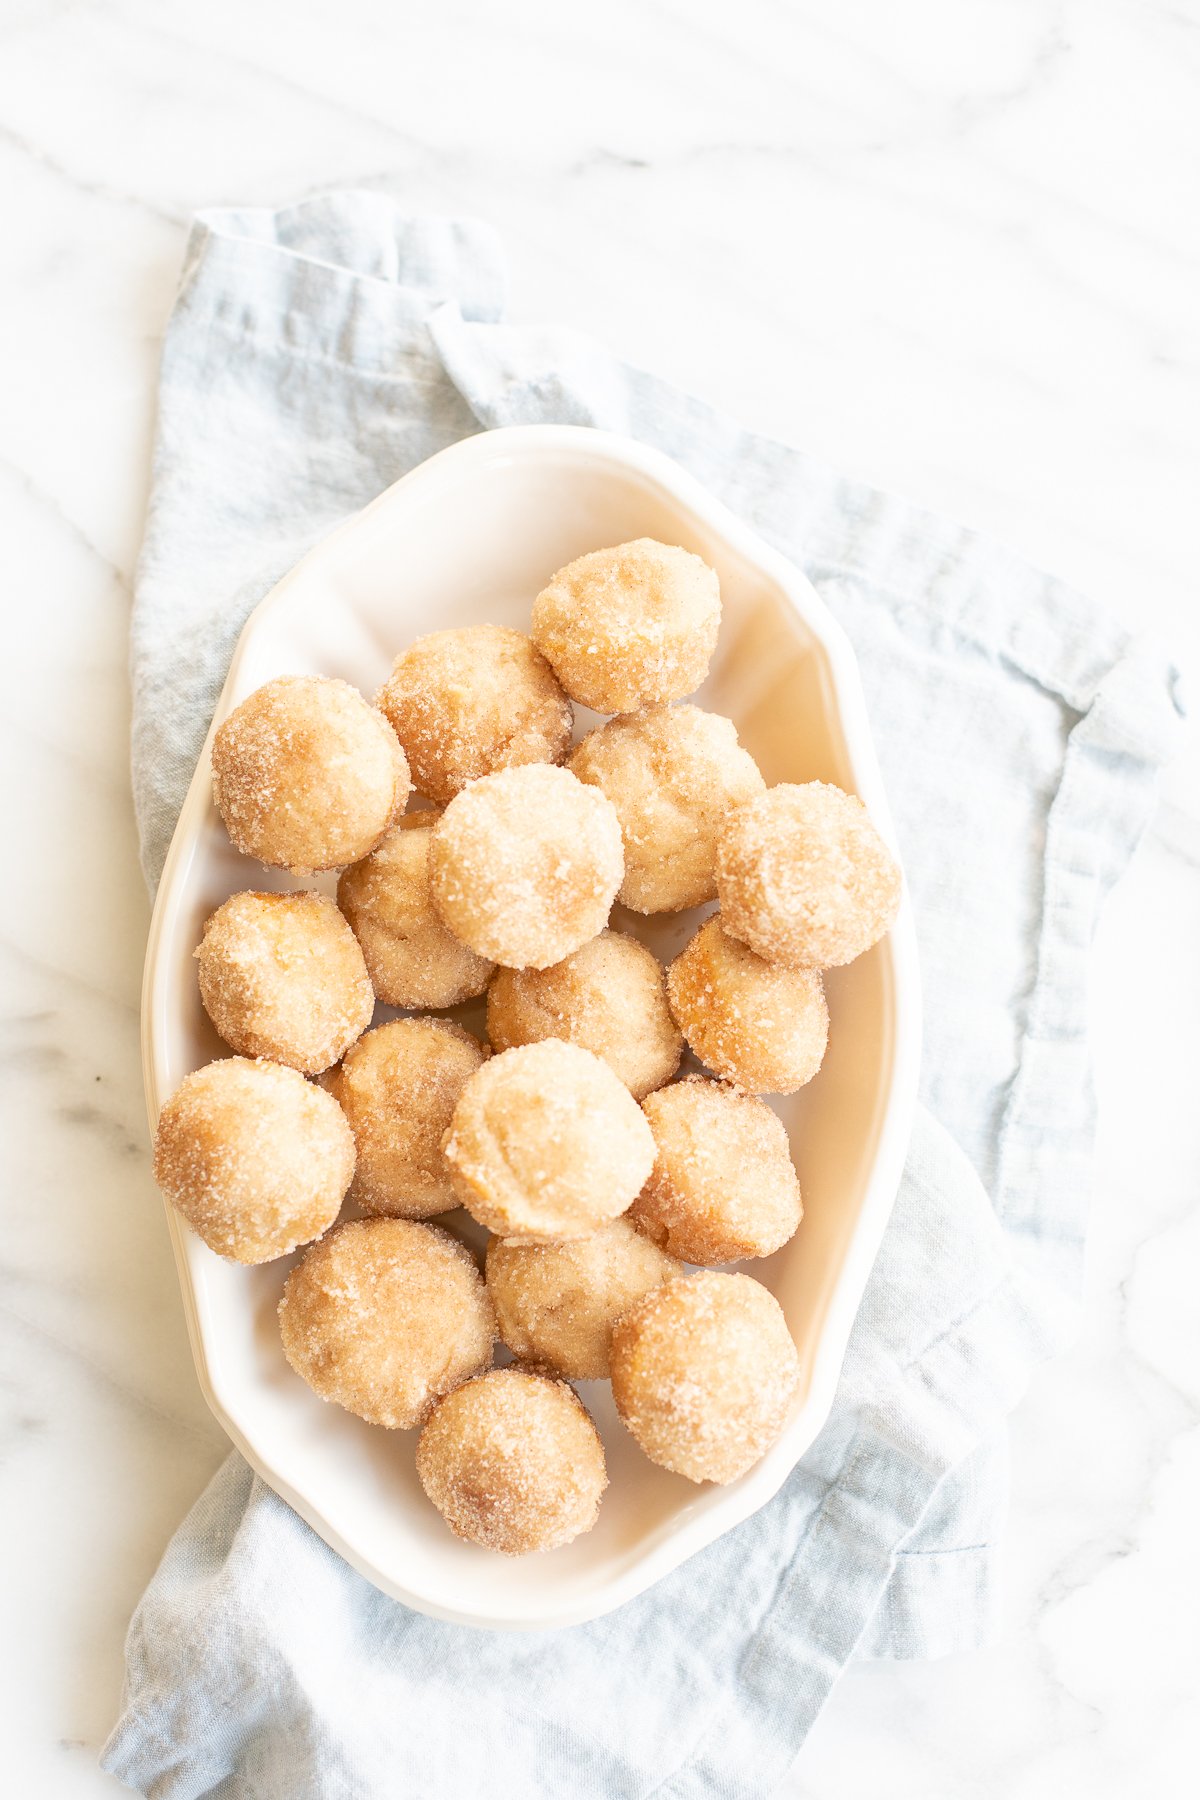 Cinnamon sugar donuts in a white bowl for Mother's Day brunch.